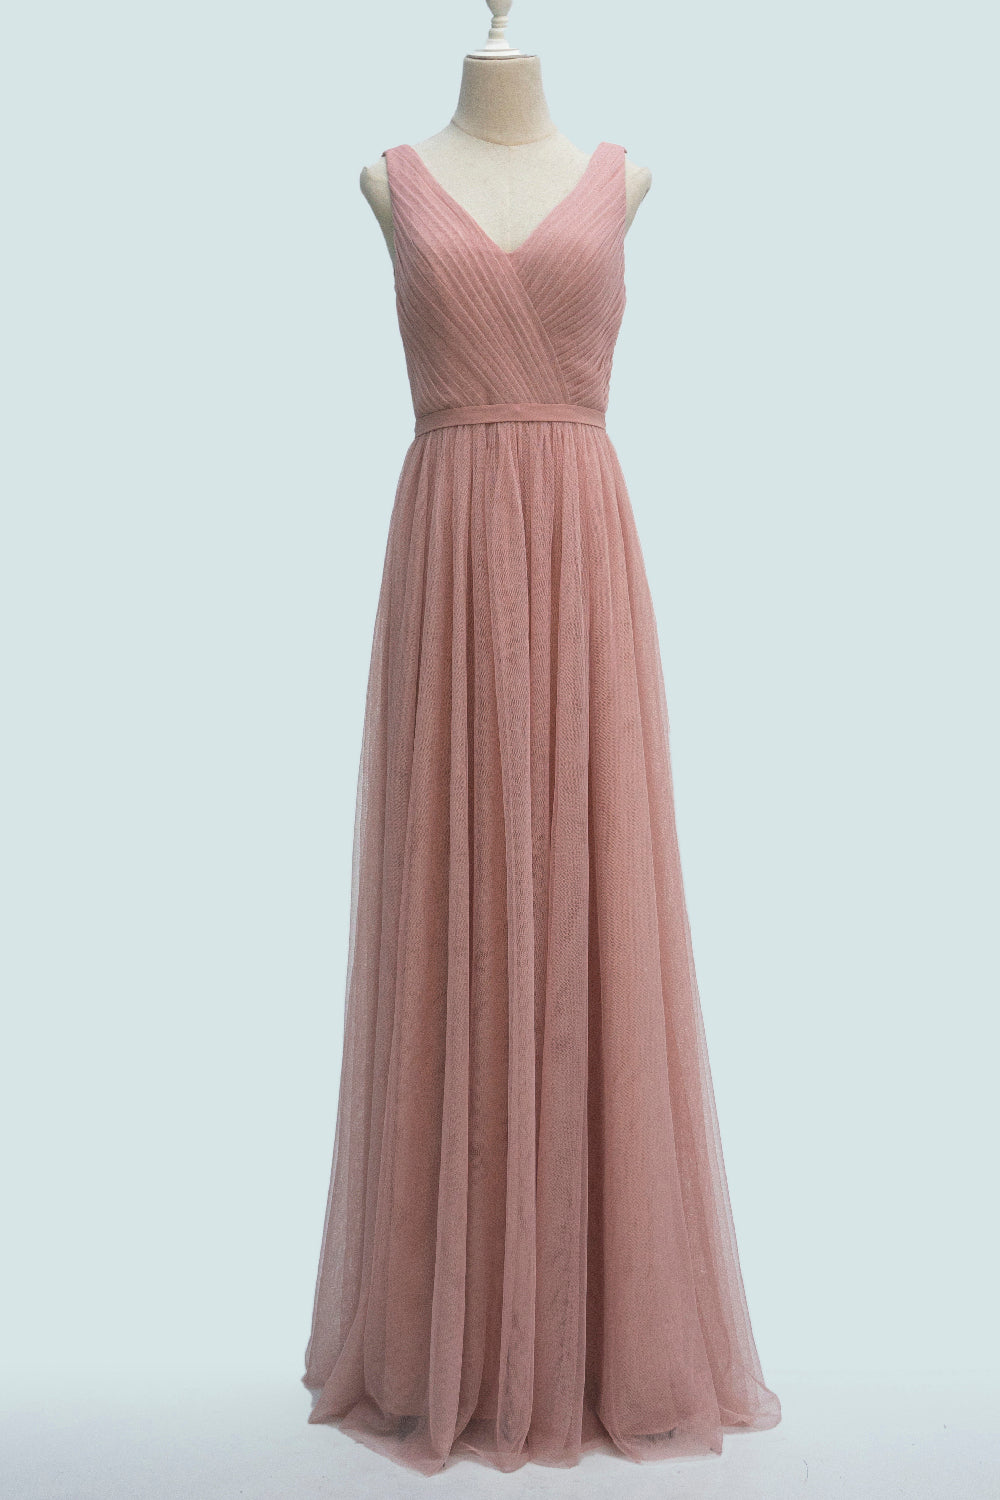 Blushing Pink A-line V-Neckline Pleated Long Bridesmaid Dress